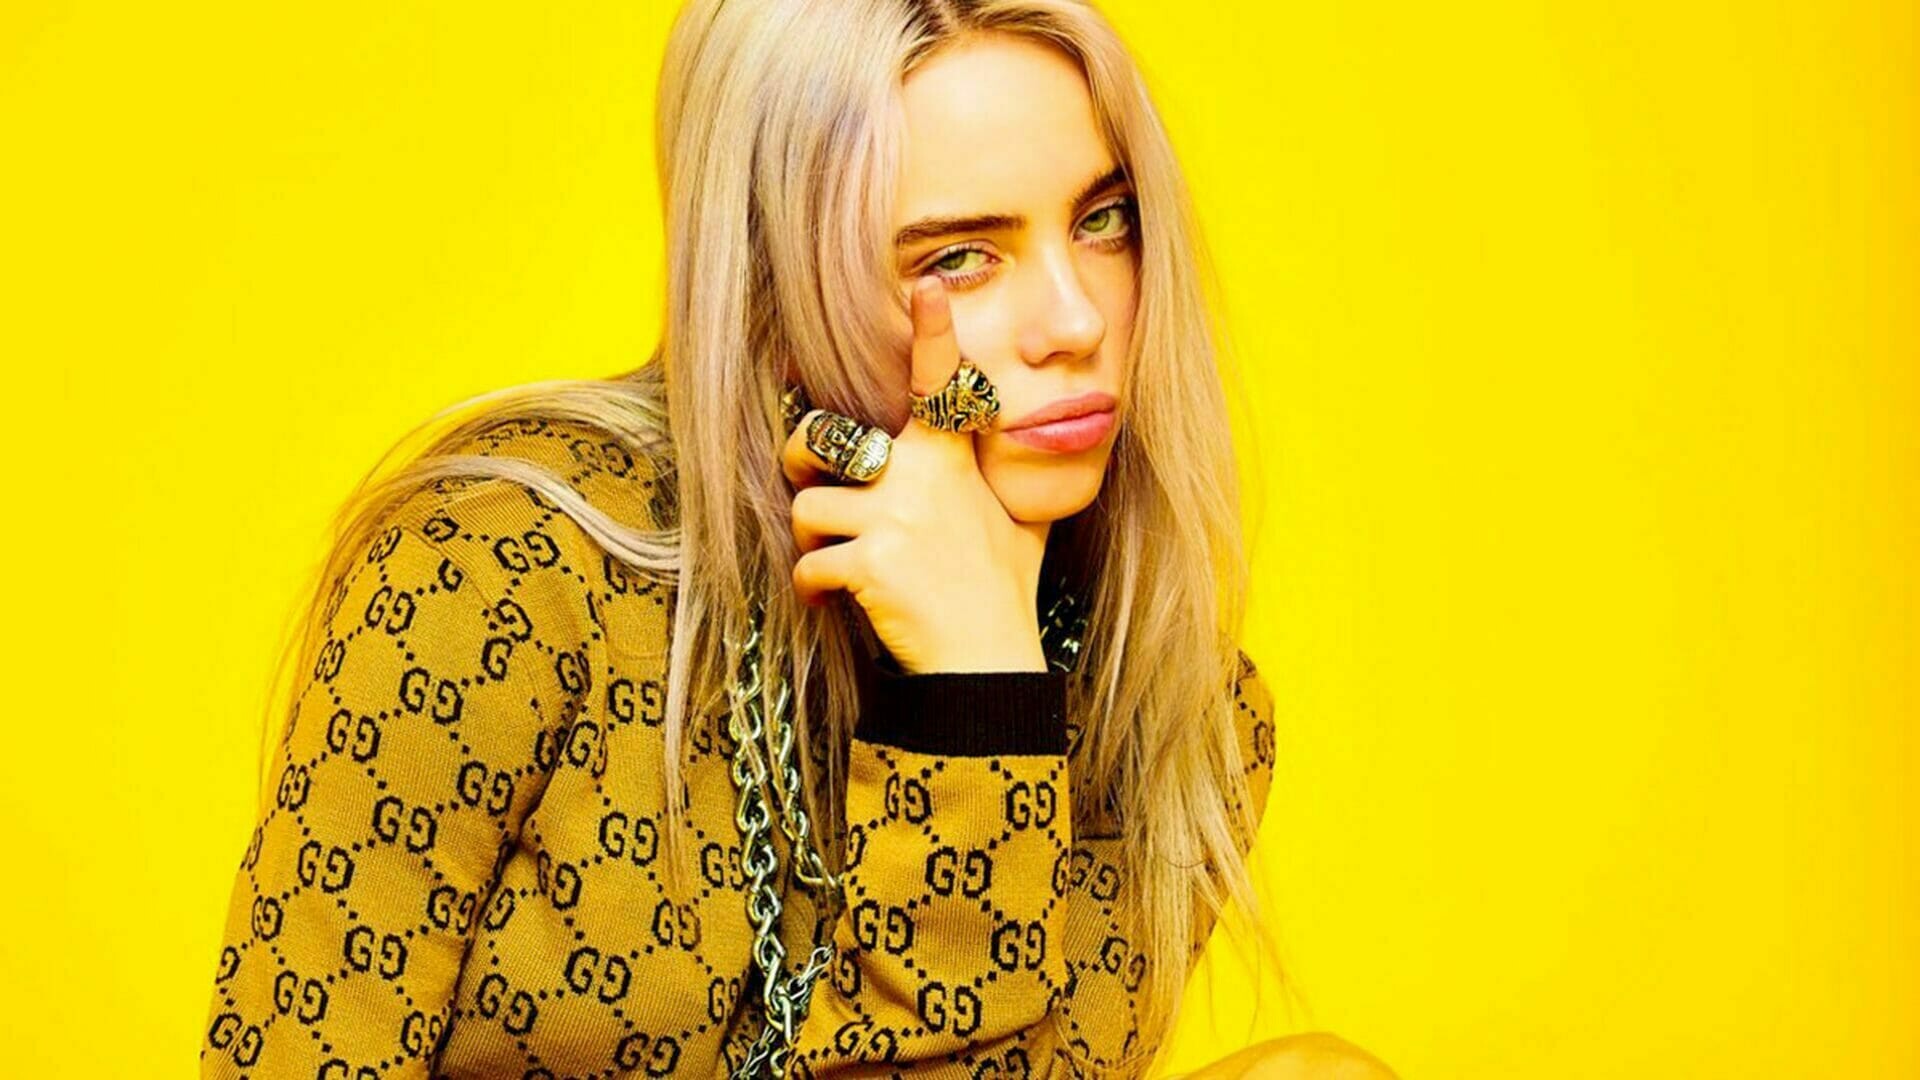 Billie Eilish: The youngest person to win all four top awards at the Grammys in one year. 1920x1080 Full HD Background.